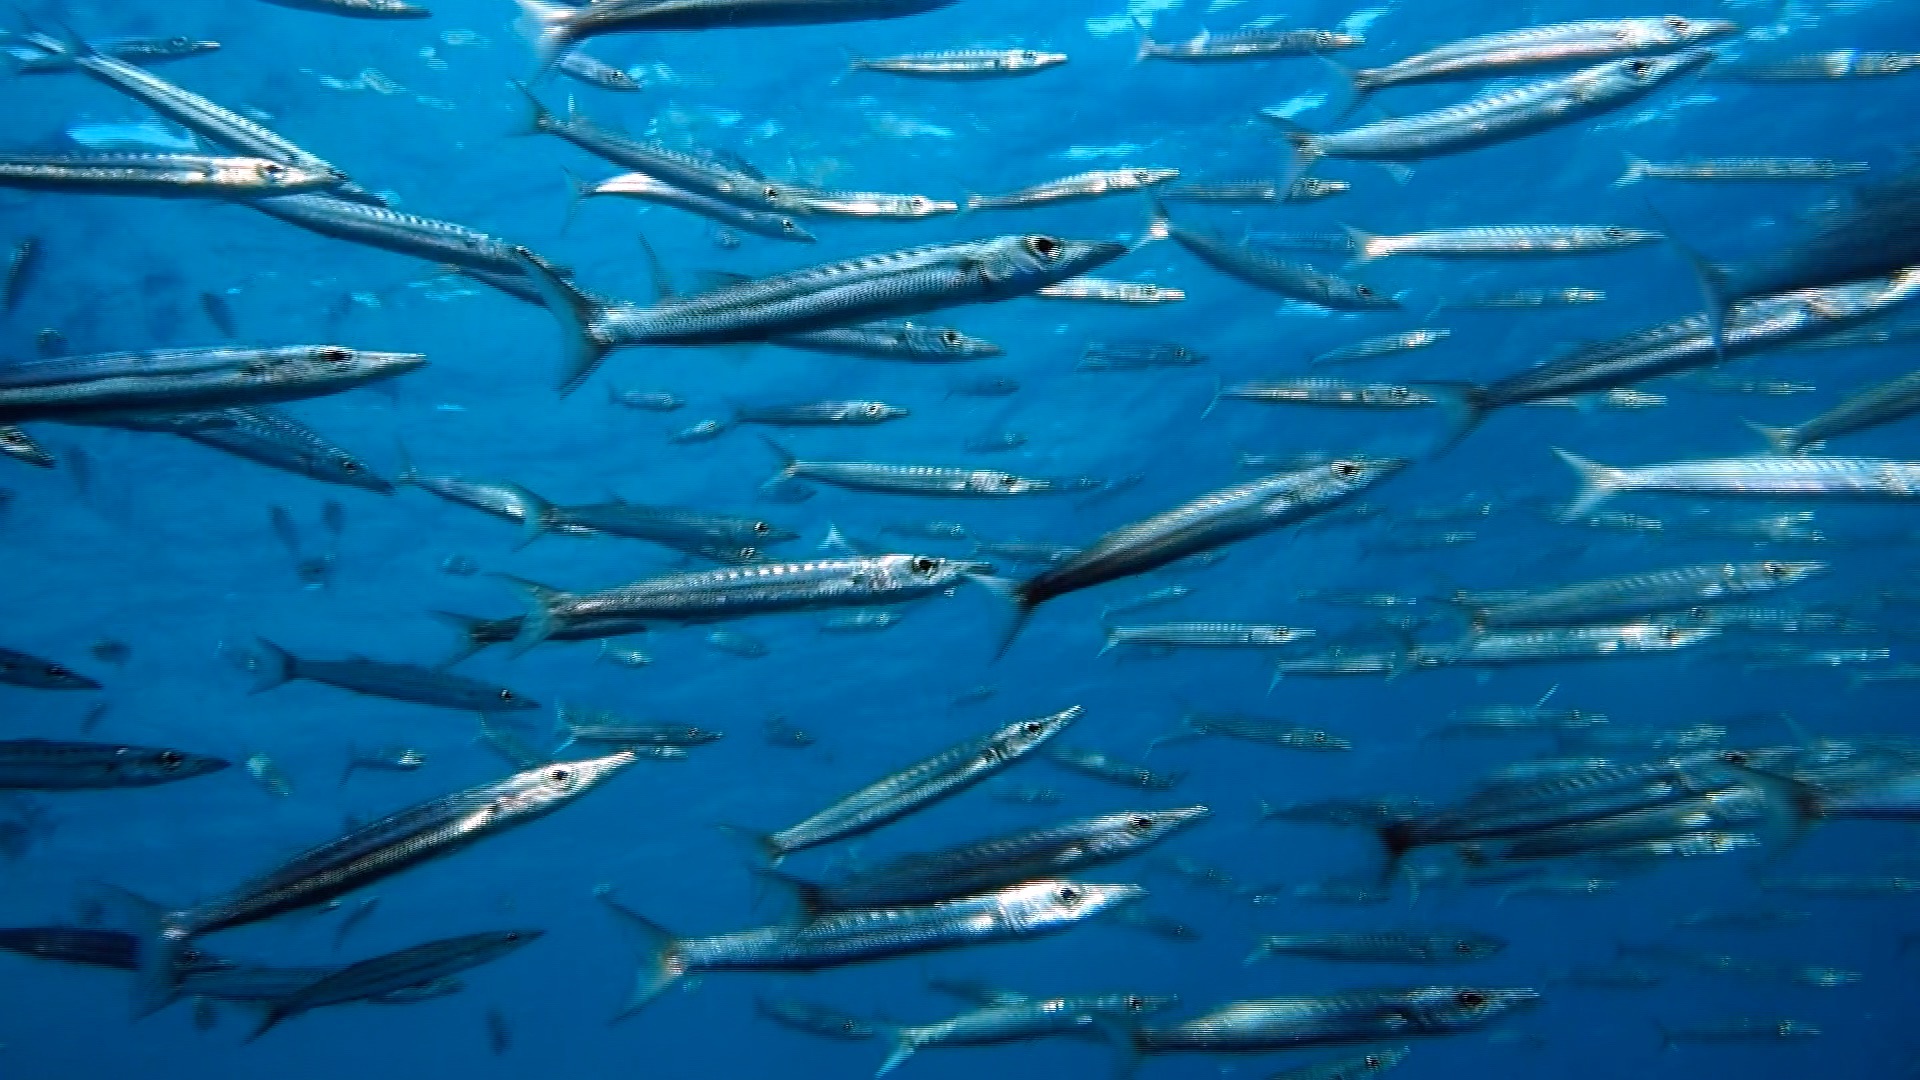 A school of Barracudas while diving in Koh Lanta